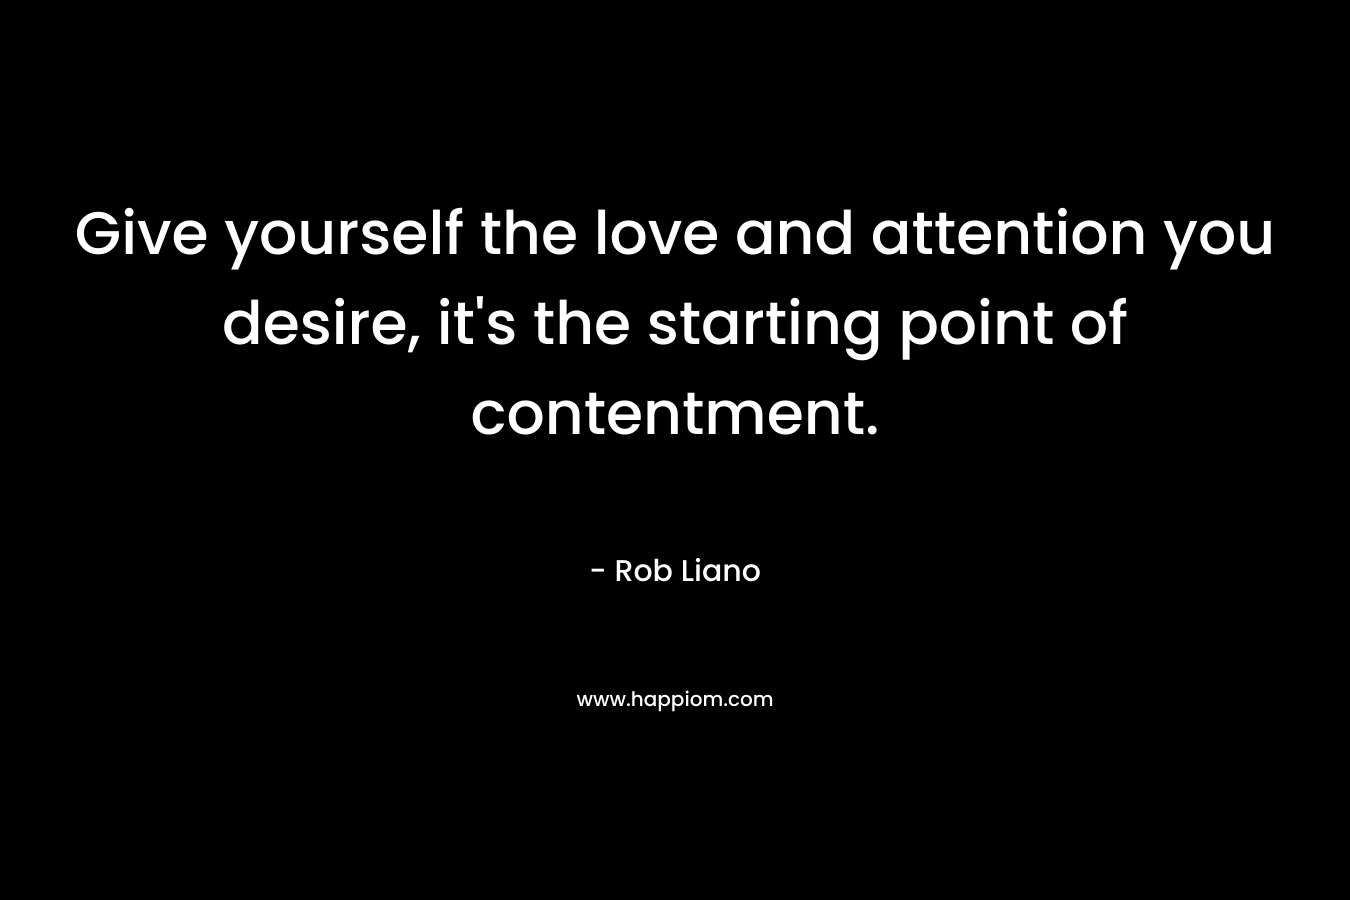 Give yourself the love and attention you desire, it’s the starting point of contentment. – Rob Liano